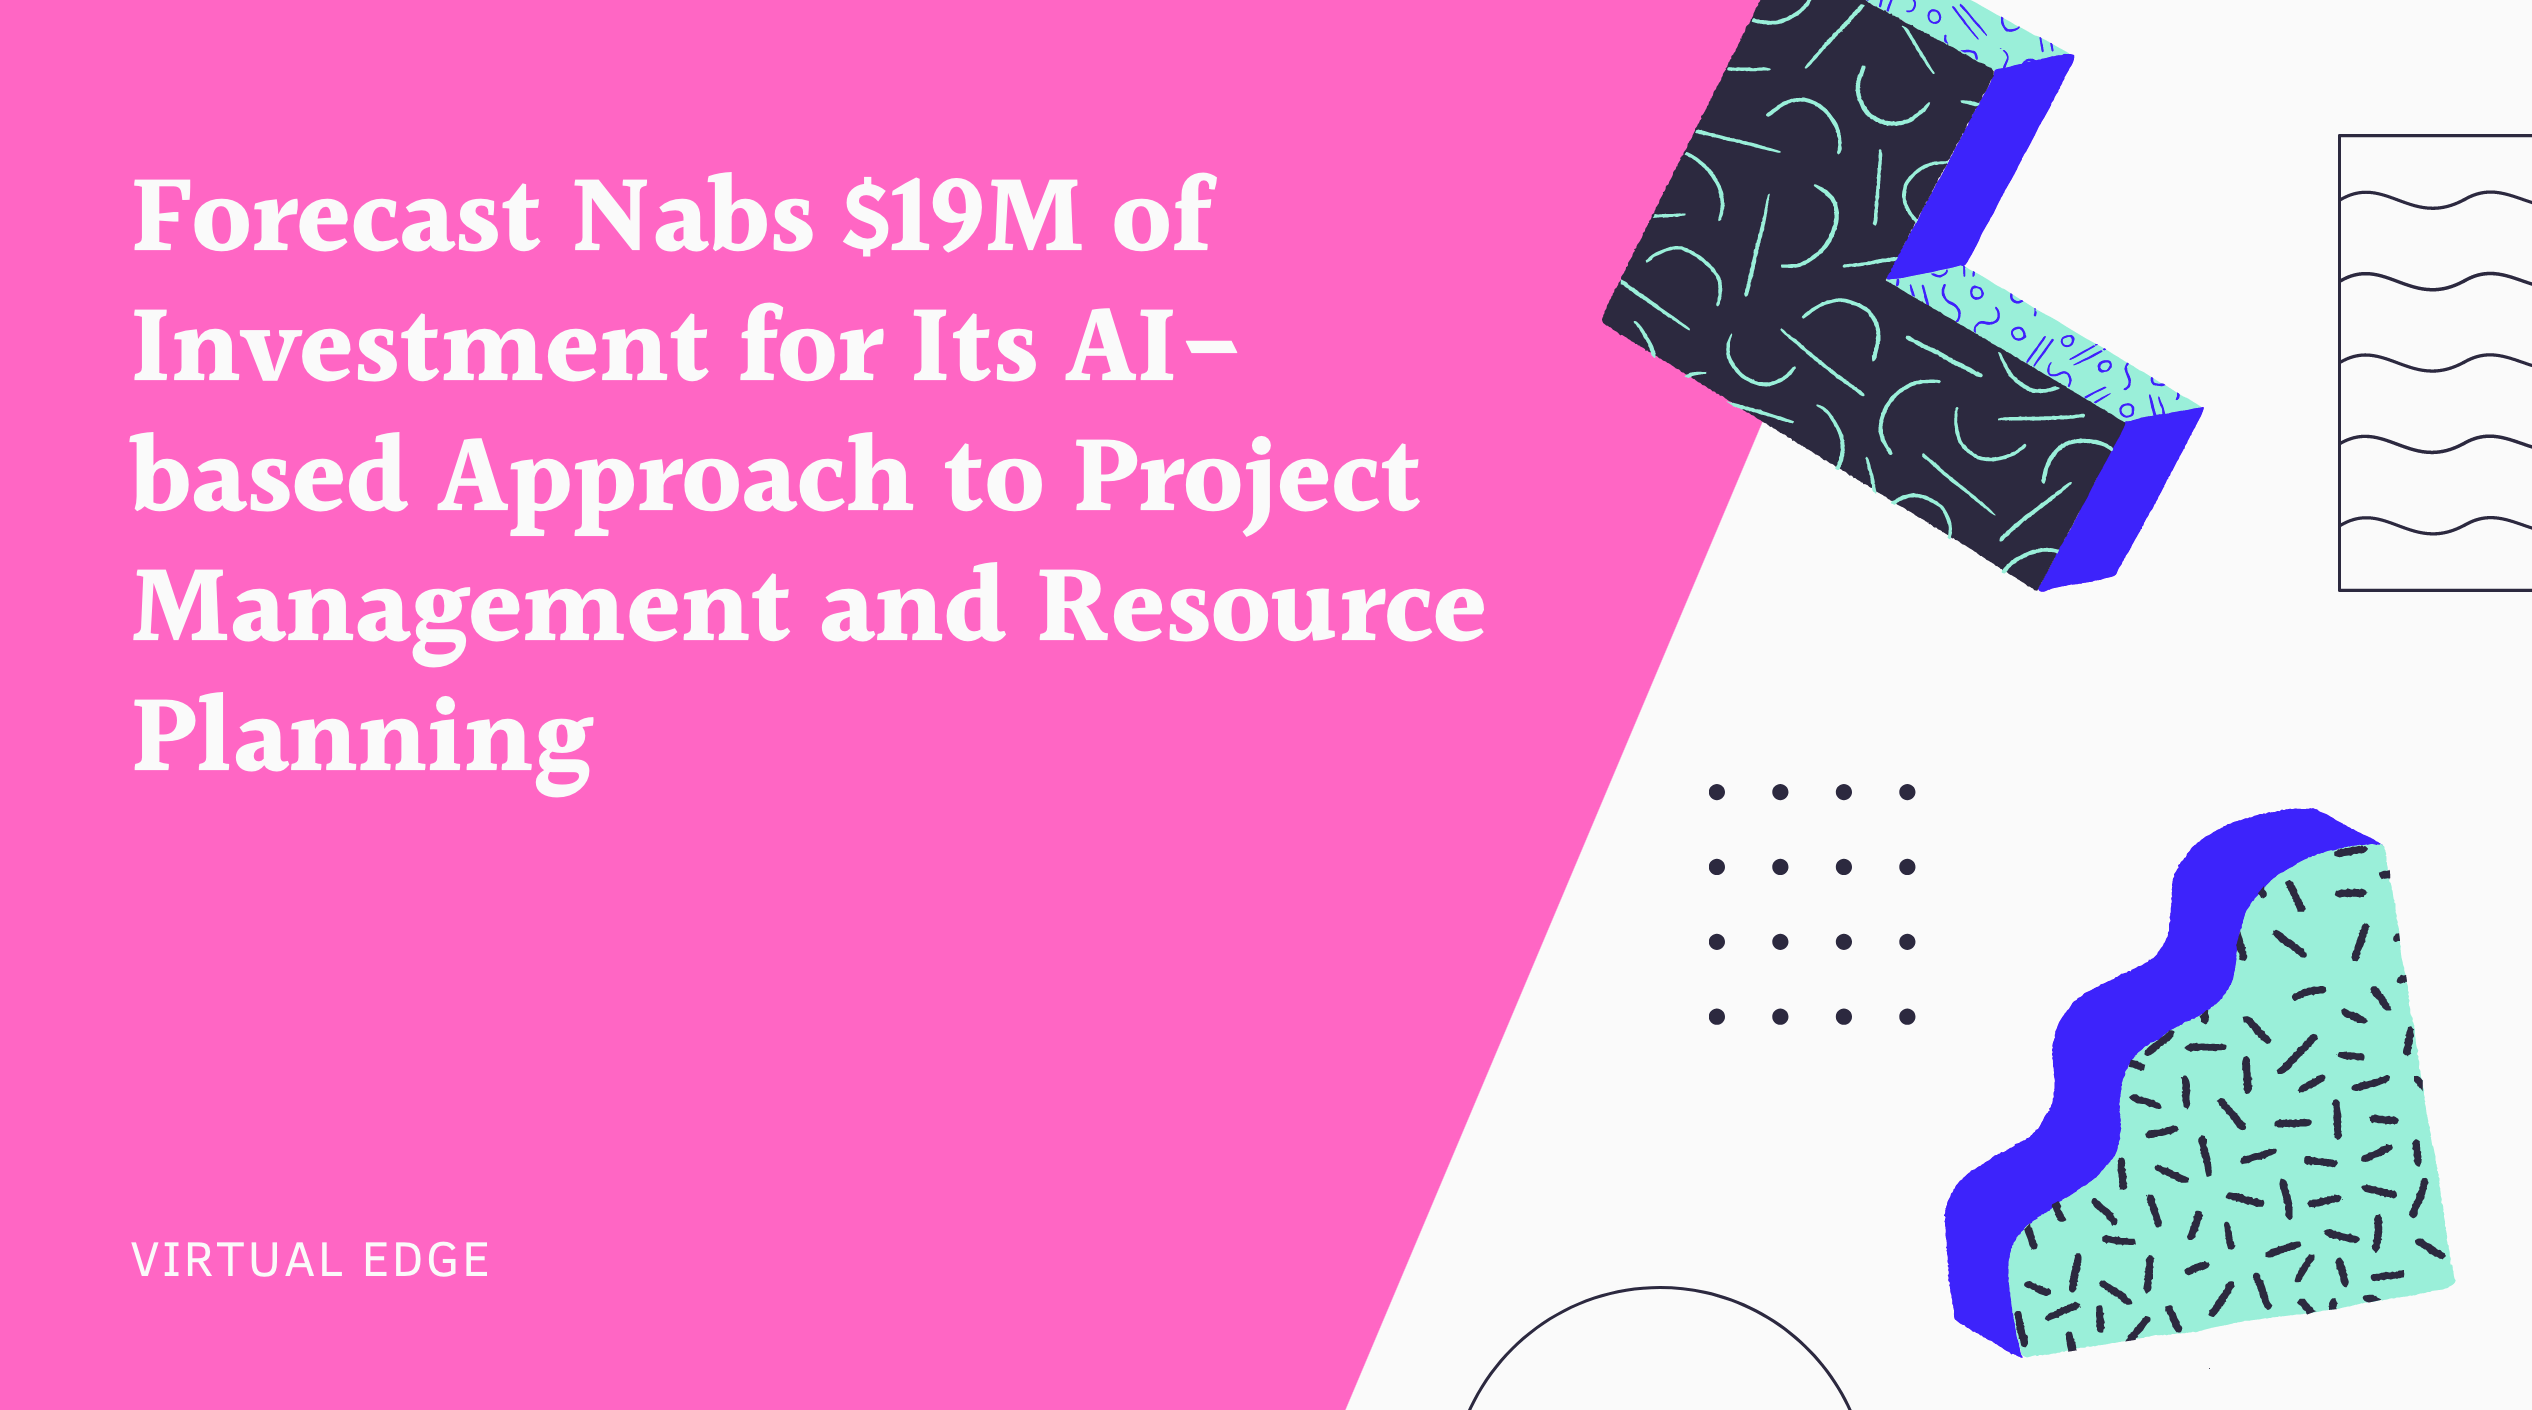 Forecast Nabs $19M of Investment for Its AI-based Approach to Project Management and Resource Planning